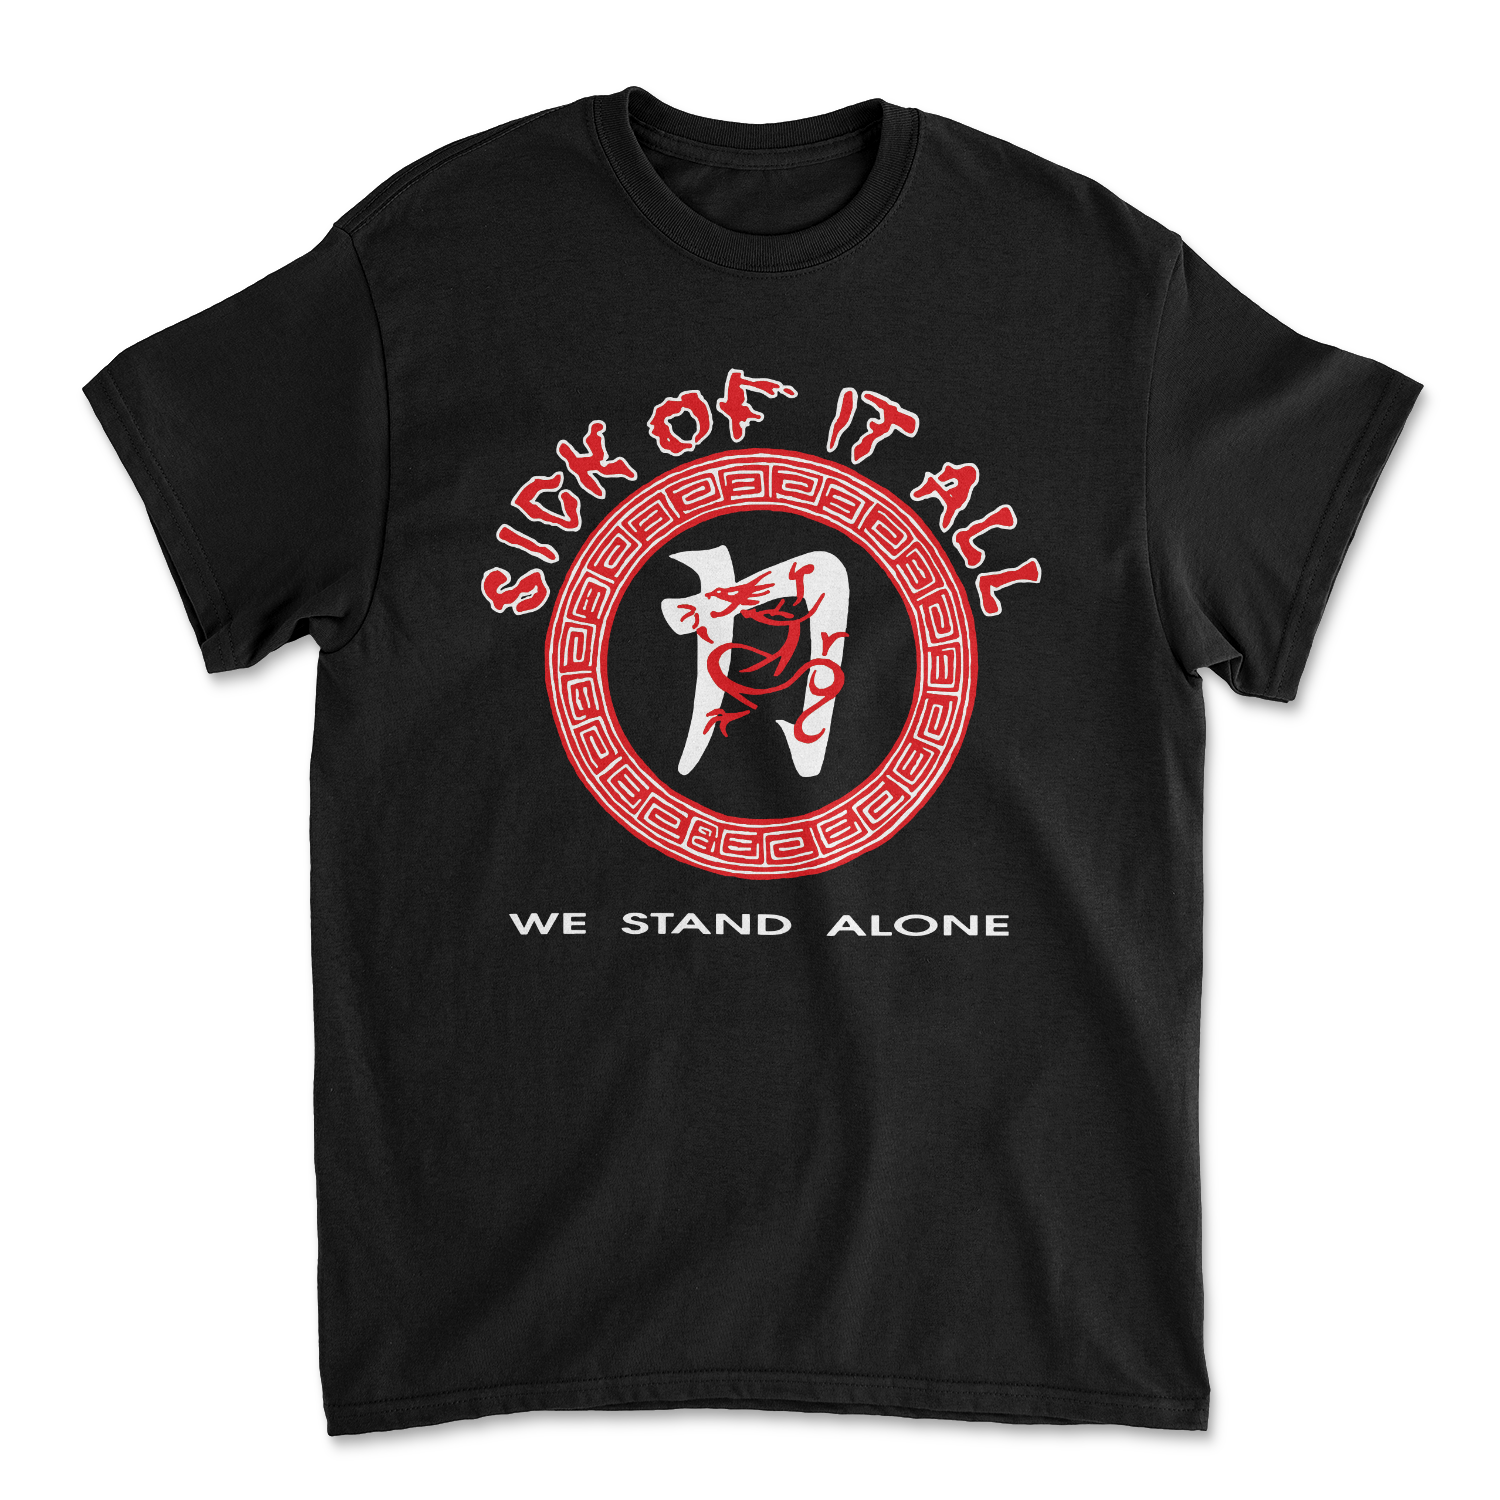 SICK OF IT ALL 'We Stand Alone' T-Shirt / Black